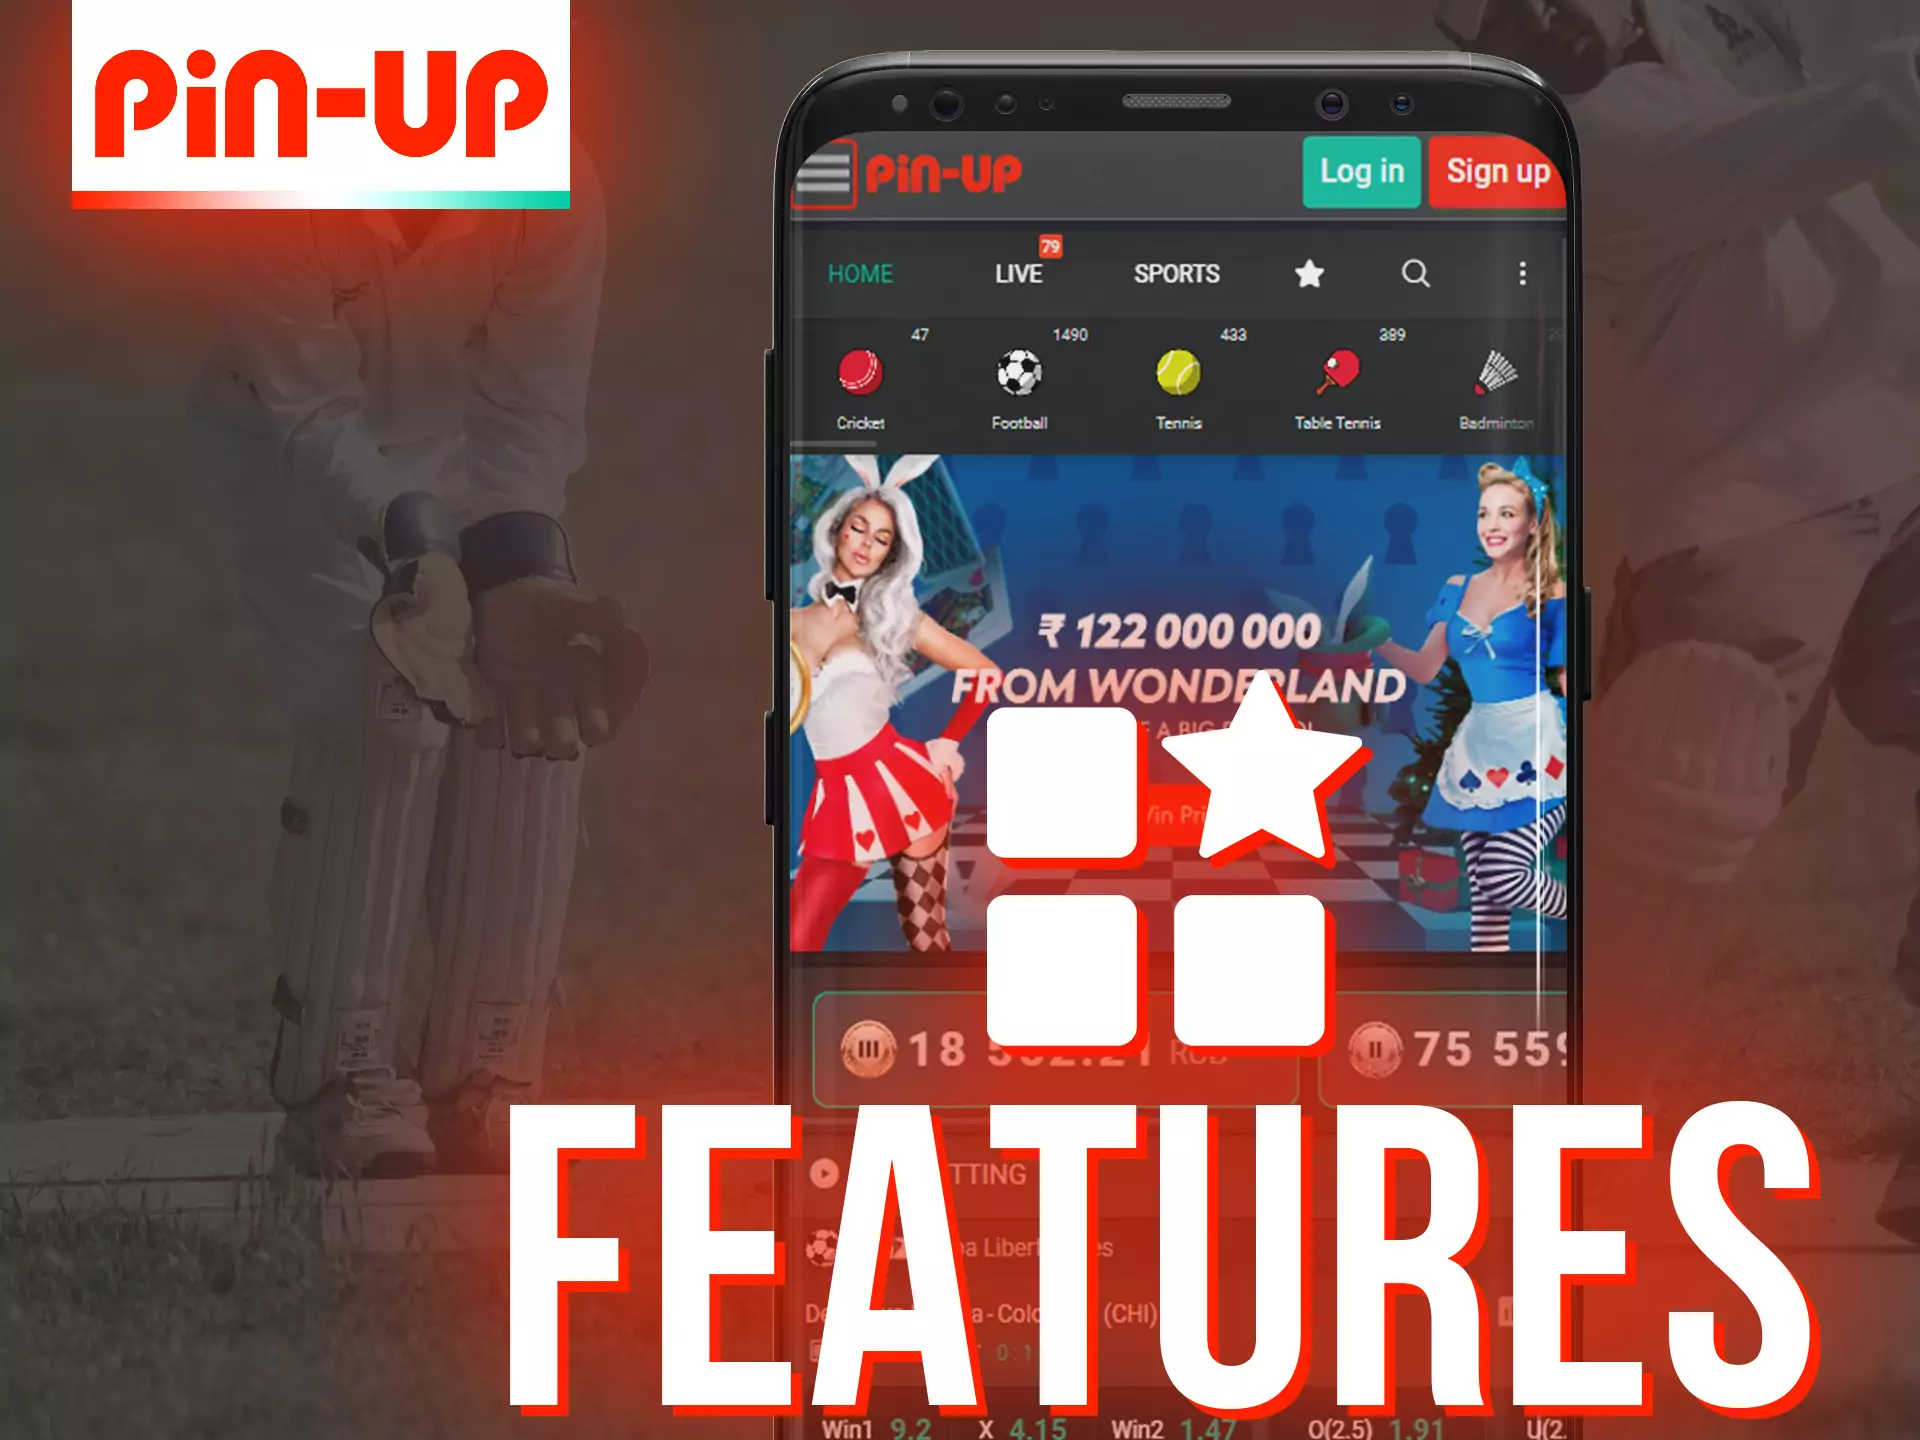 Pin-Up app has convenient features for betting and casino games.